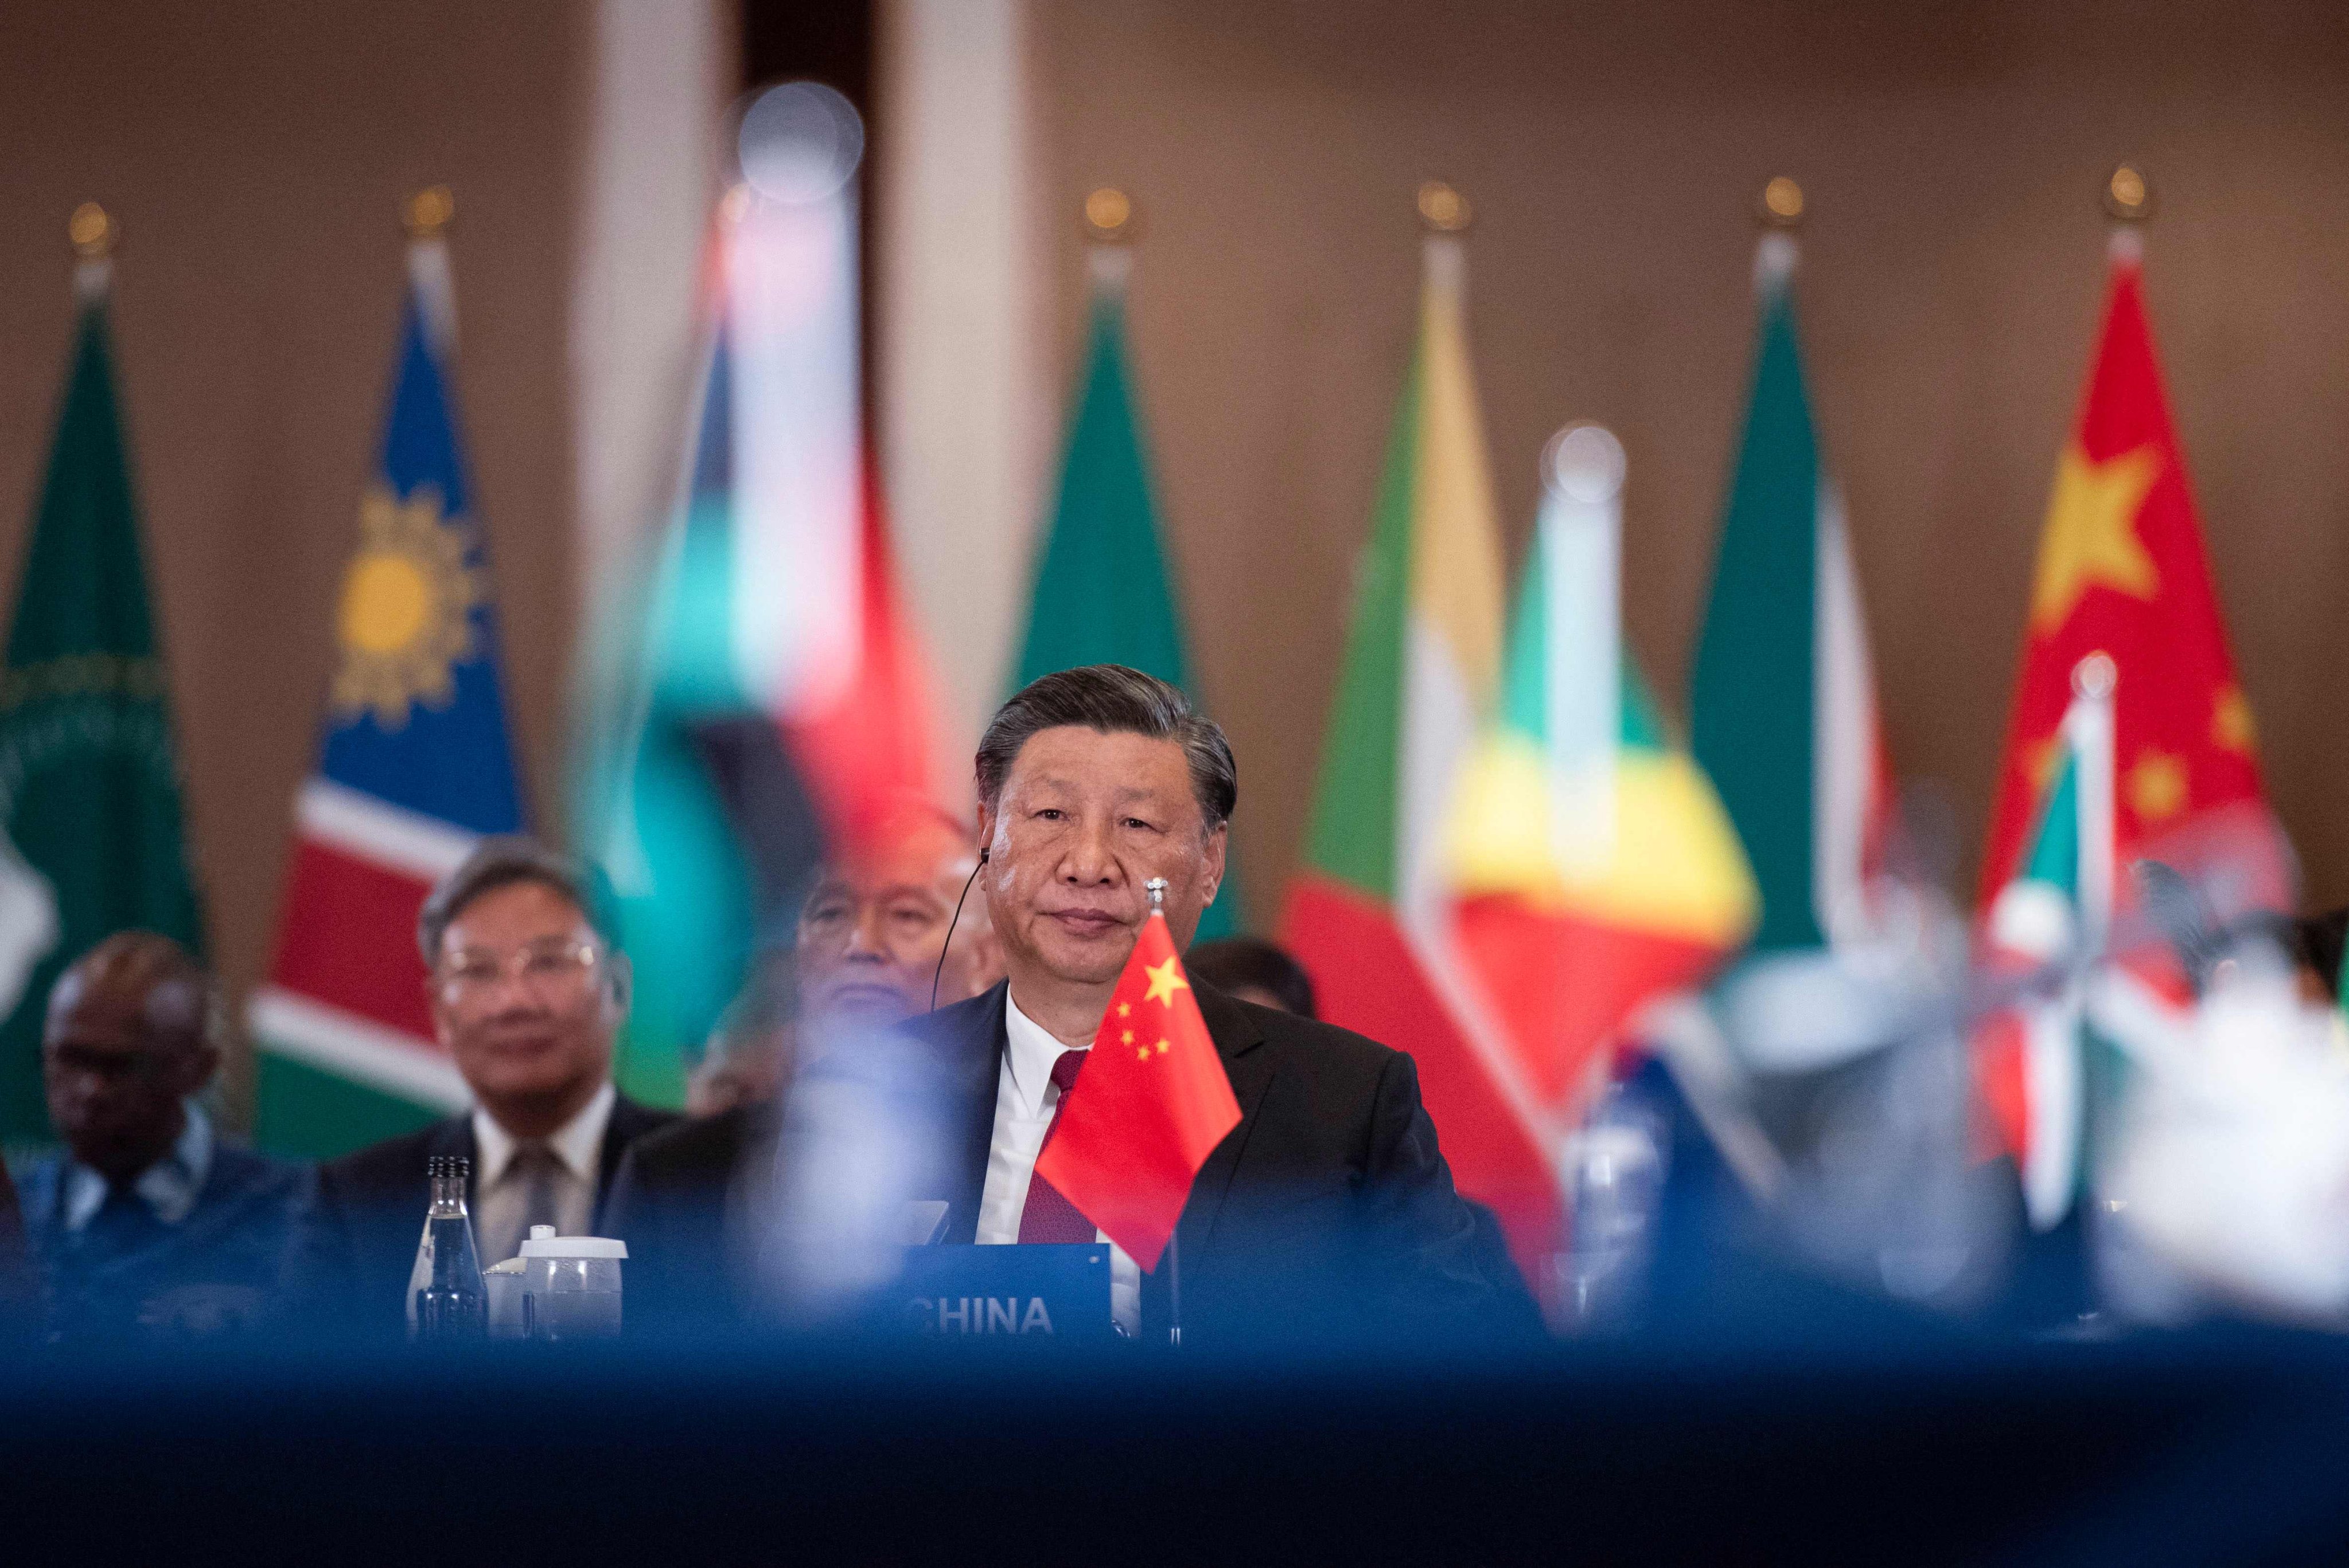 In this issue of the Global Impact newsletter, we look back at the decision to expand the Brics group of leading emerging markets, and ponders what it means going forward. Photo: AFP